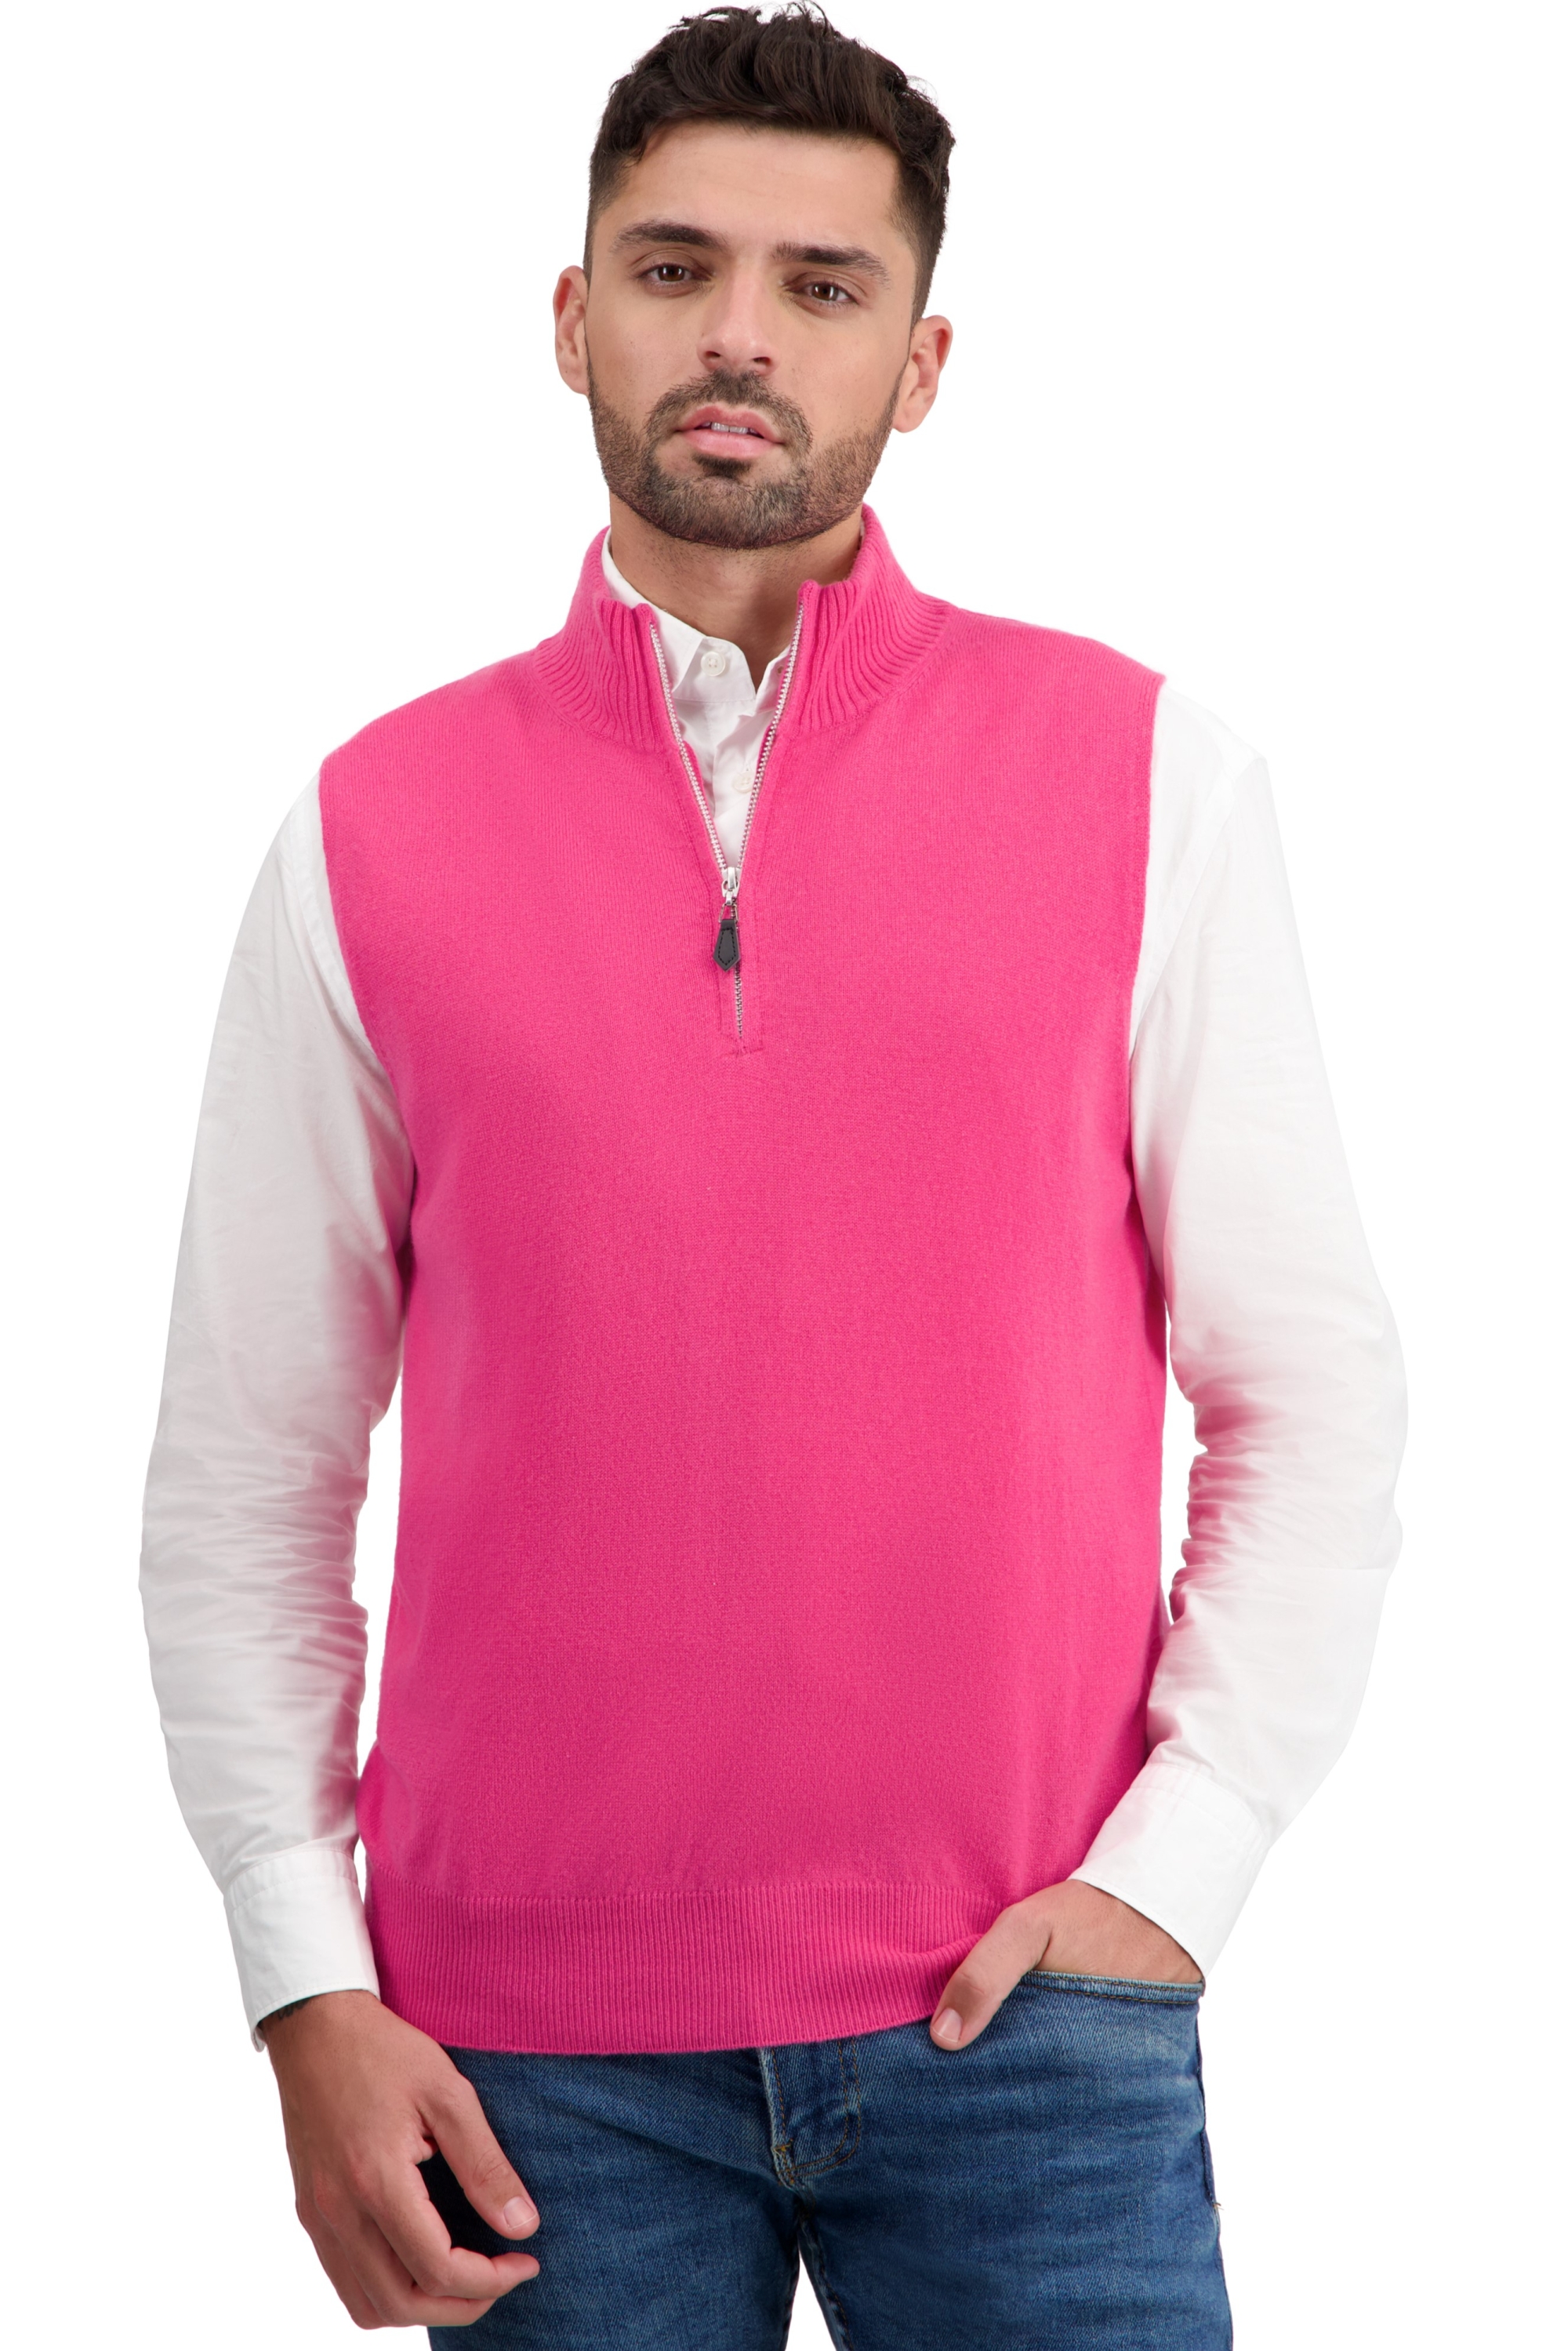 Cashmere men polo style sweaters texas shocking pink s